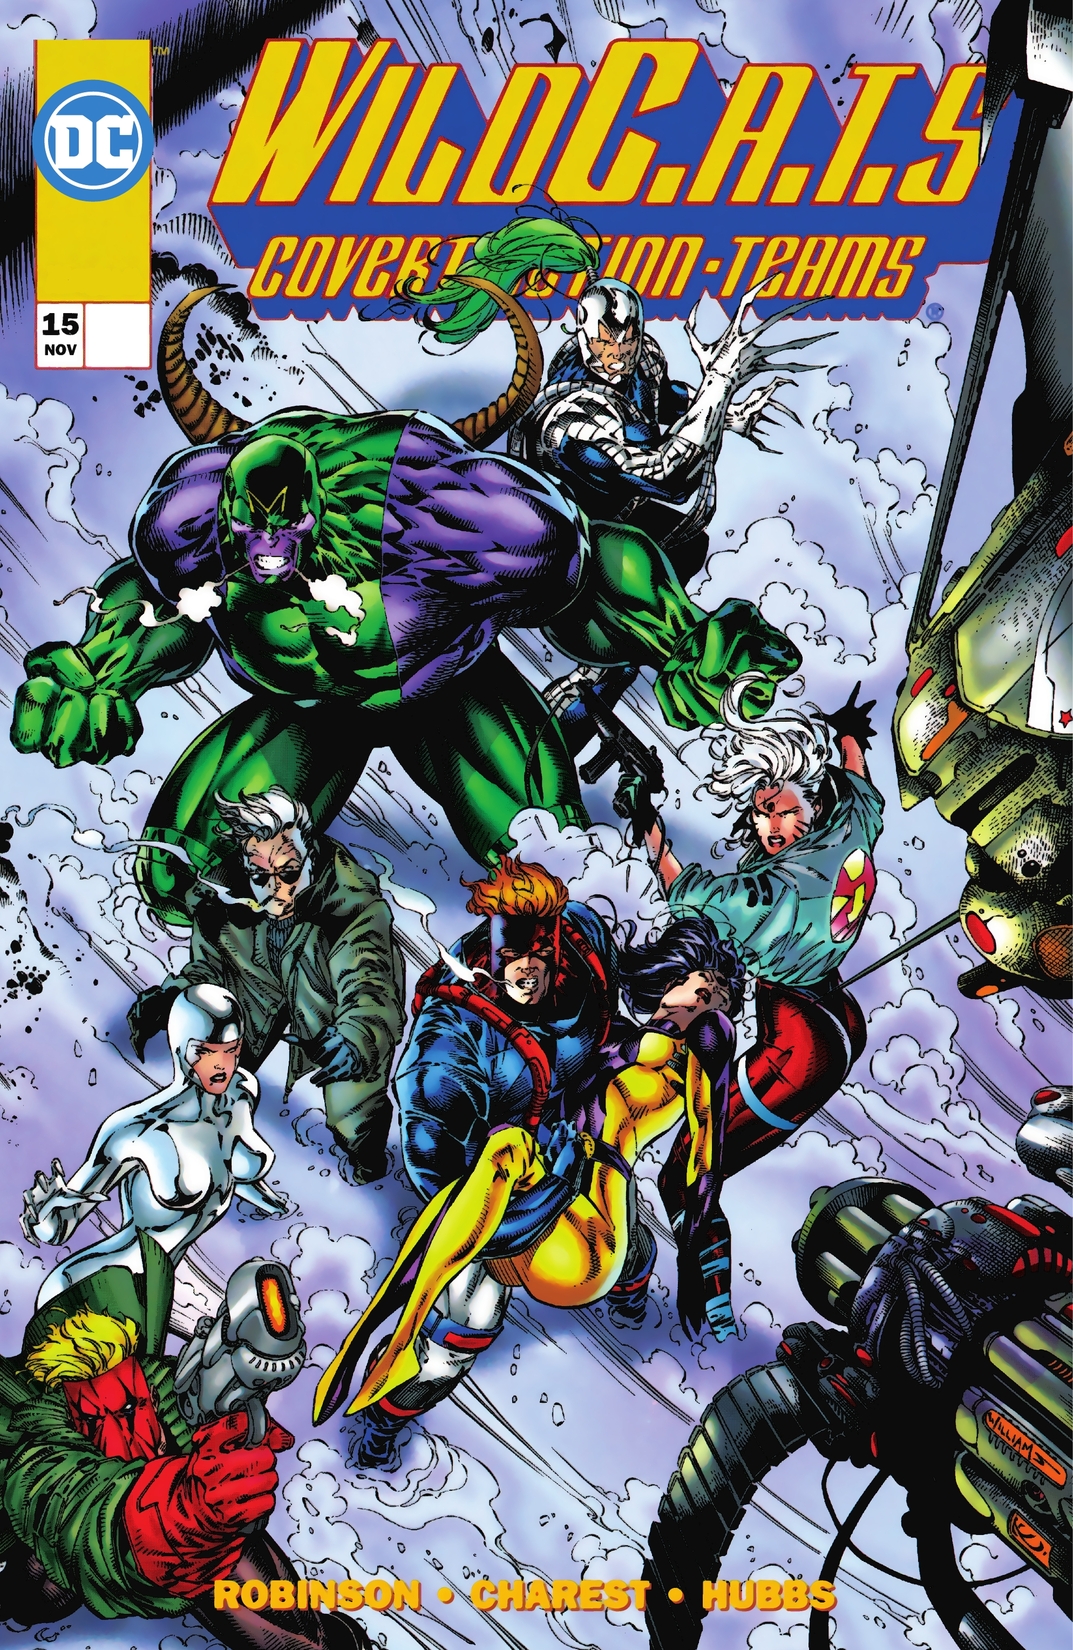 WildC.A.Ts: Covert Action Teams #15 preview images